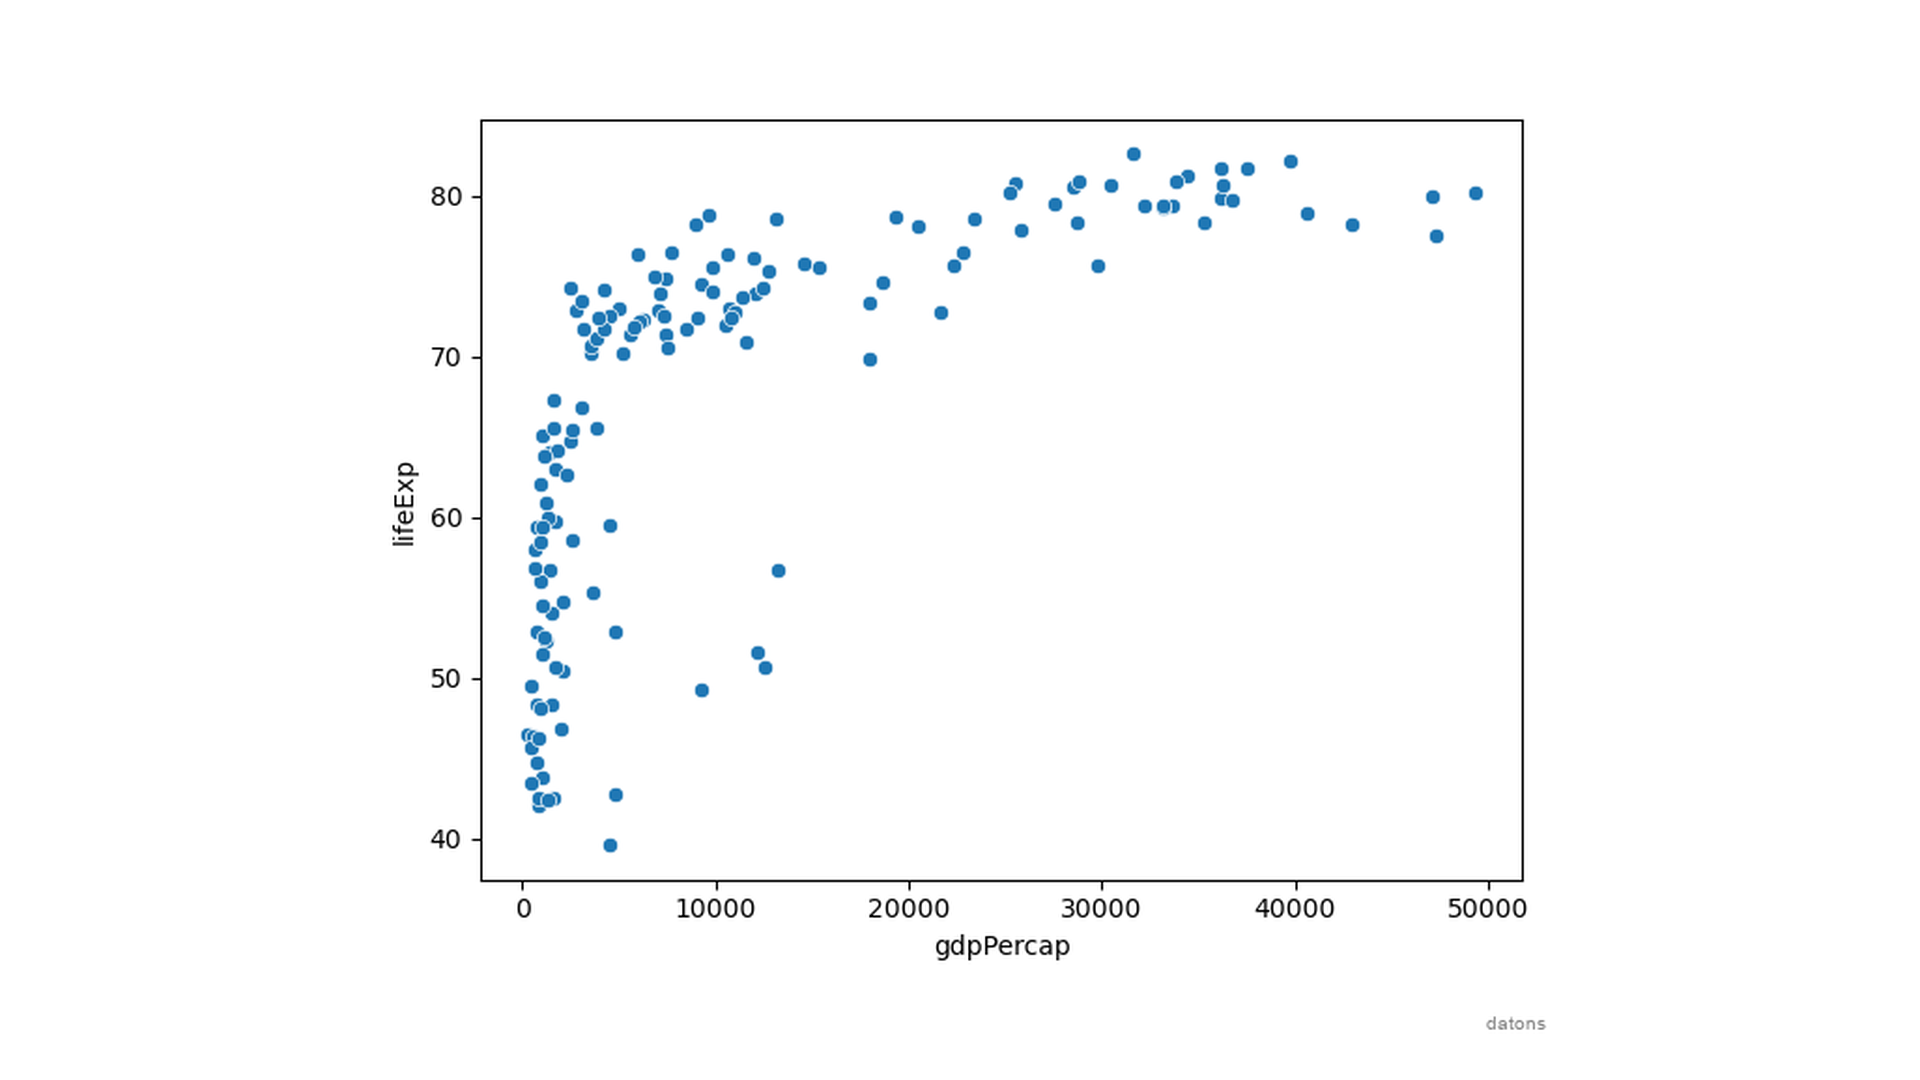 Scatter plot with axes labels and styled points, created using Seaborn